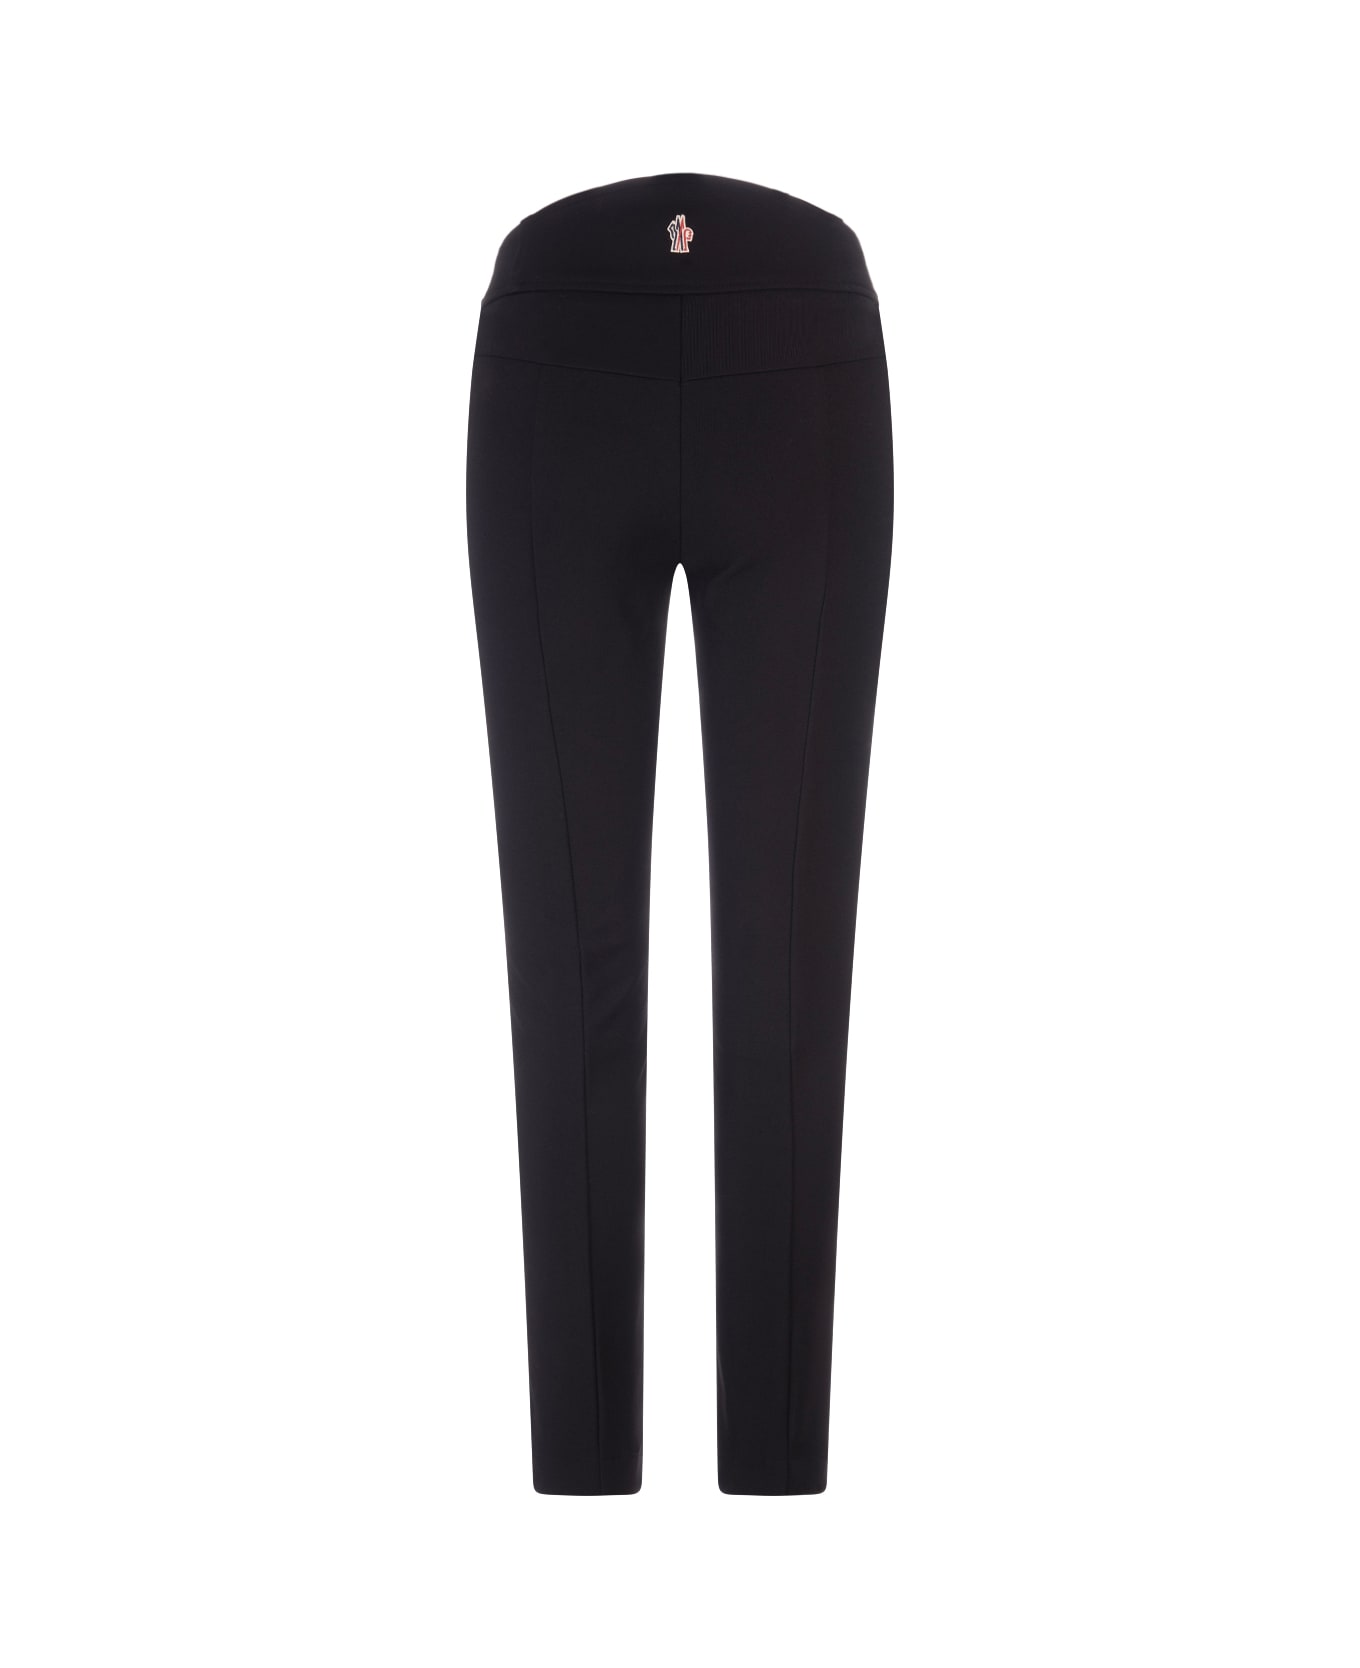 Moncler Woman Black Trousers In Technical Twill - Black